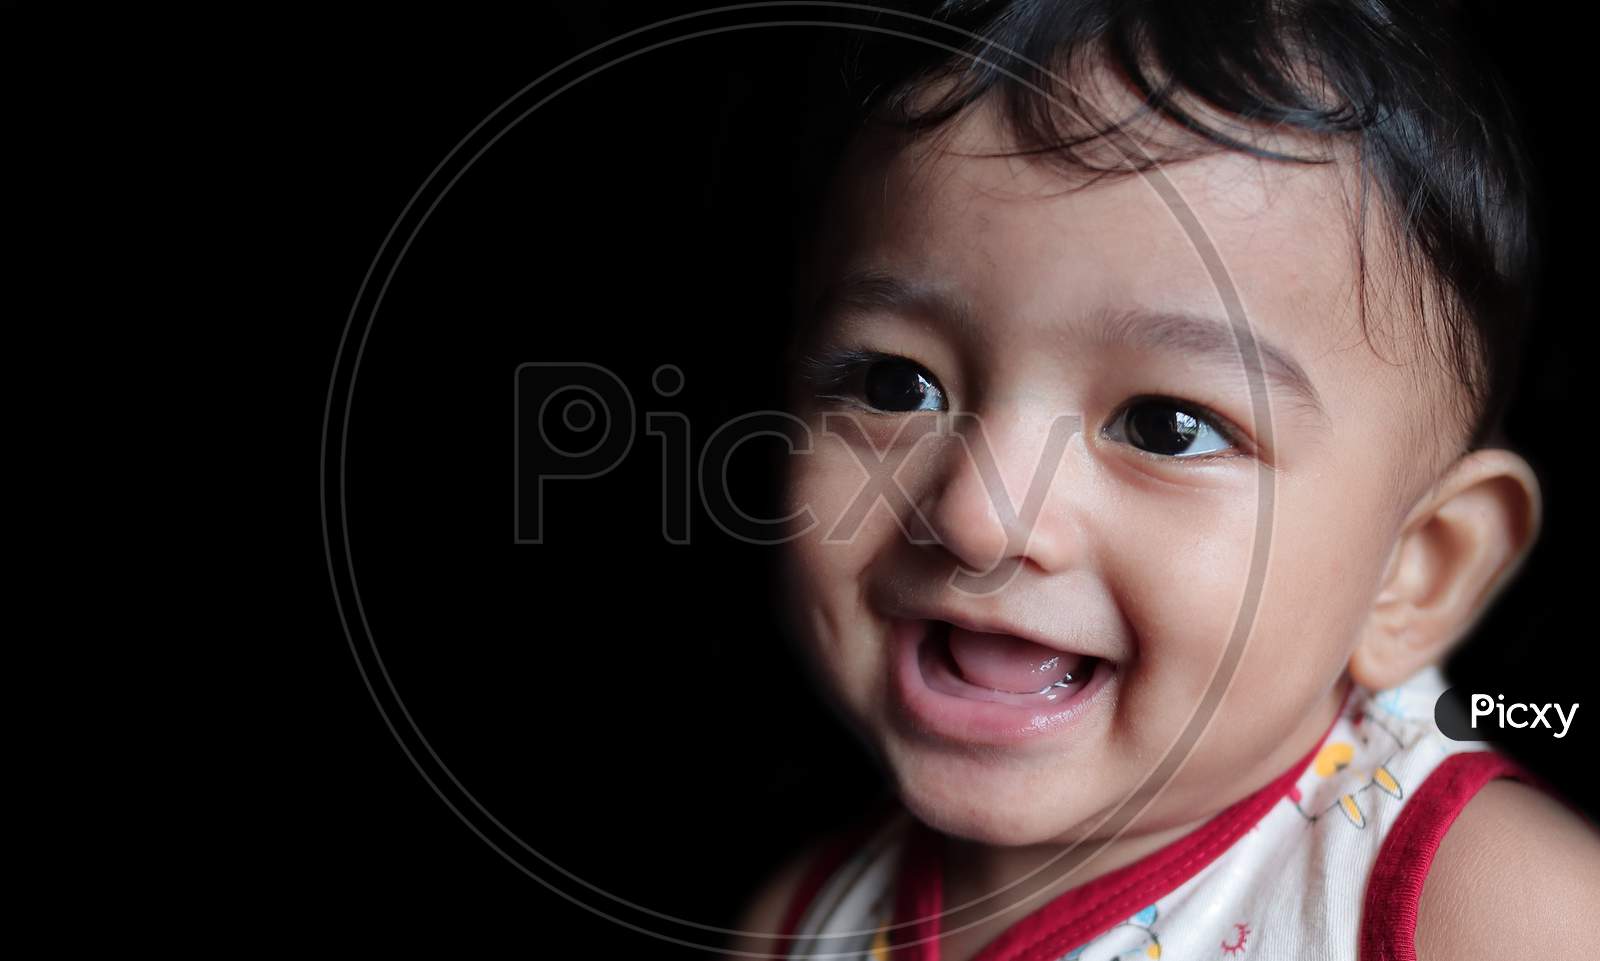 A Head Shot Portrait Of An Adorable Indian Baby Looking At Left With Selective Focus On Front Eye With Copy Space In Black Background